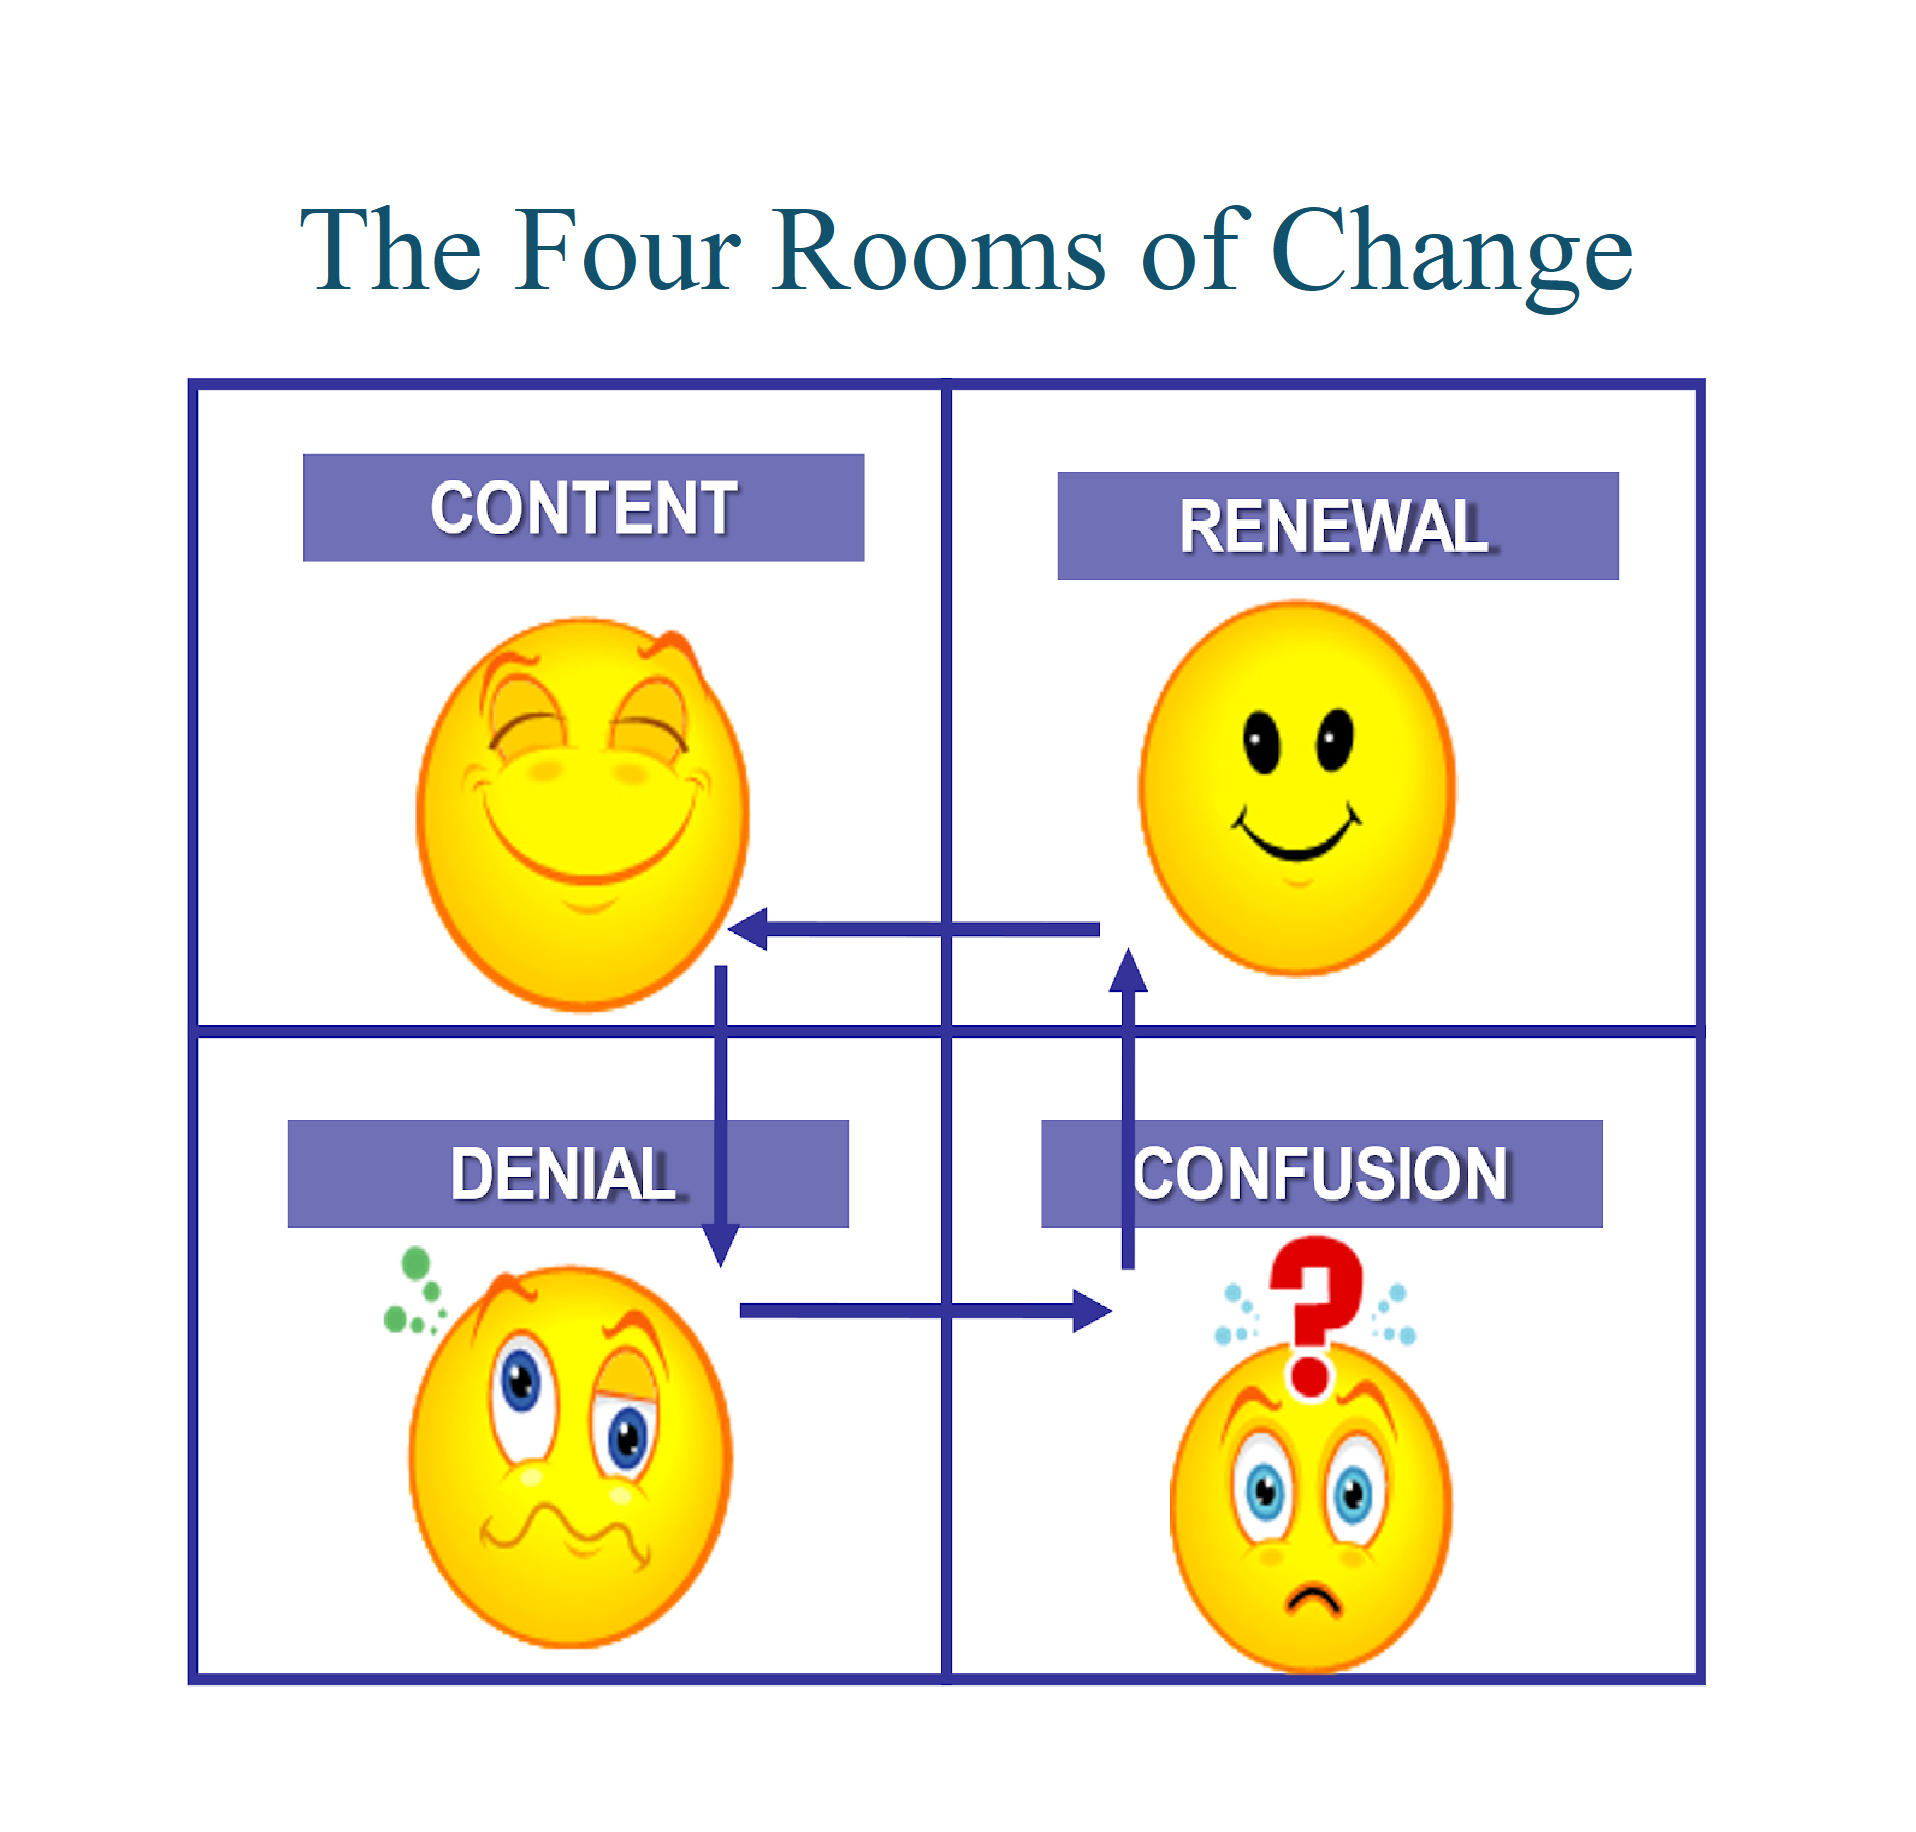 The Four Rooms of Change